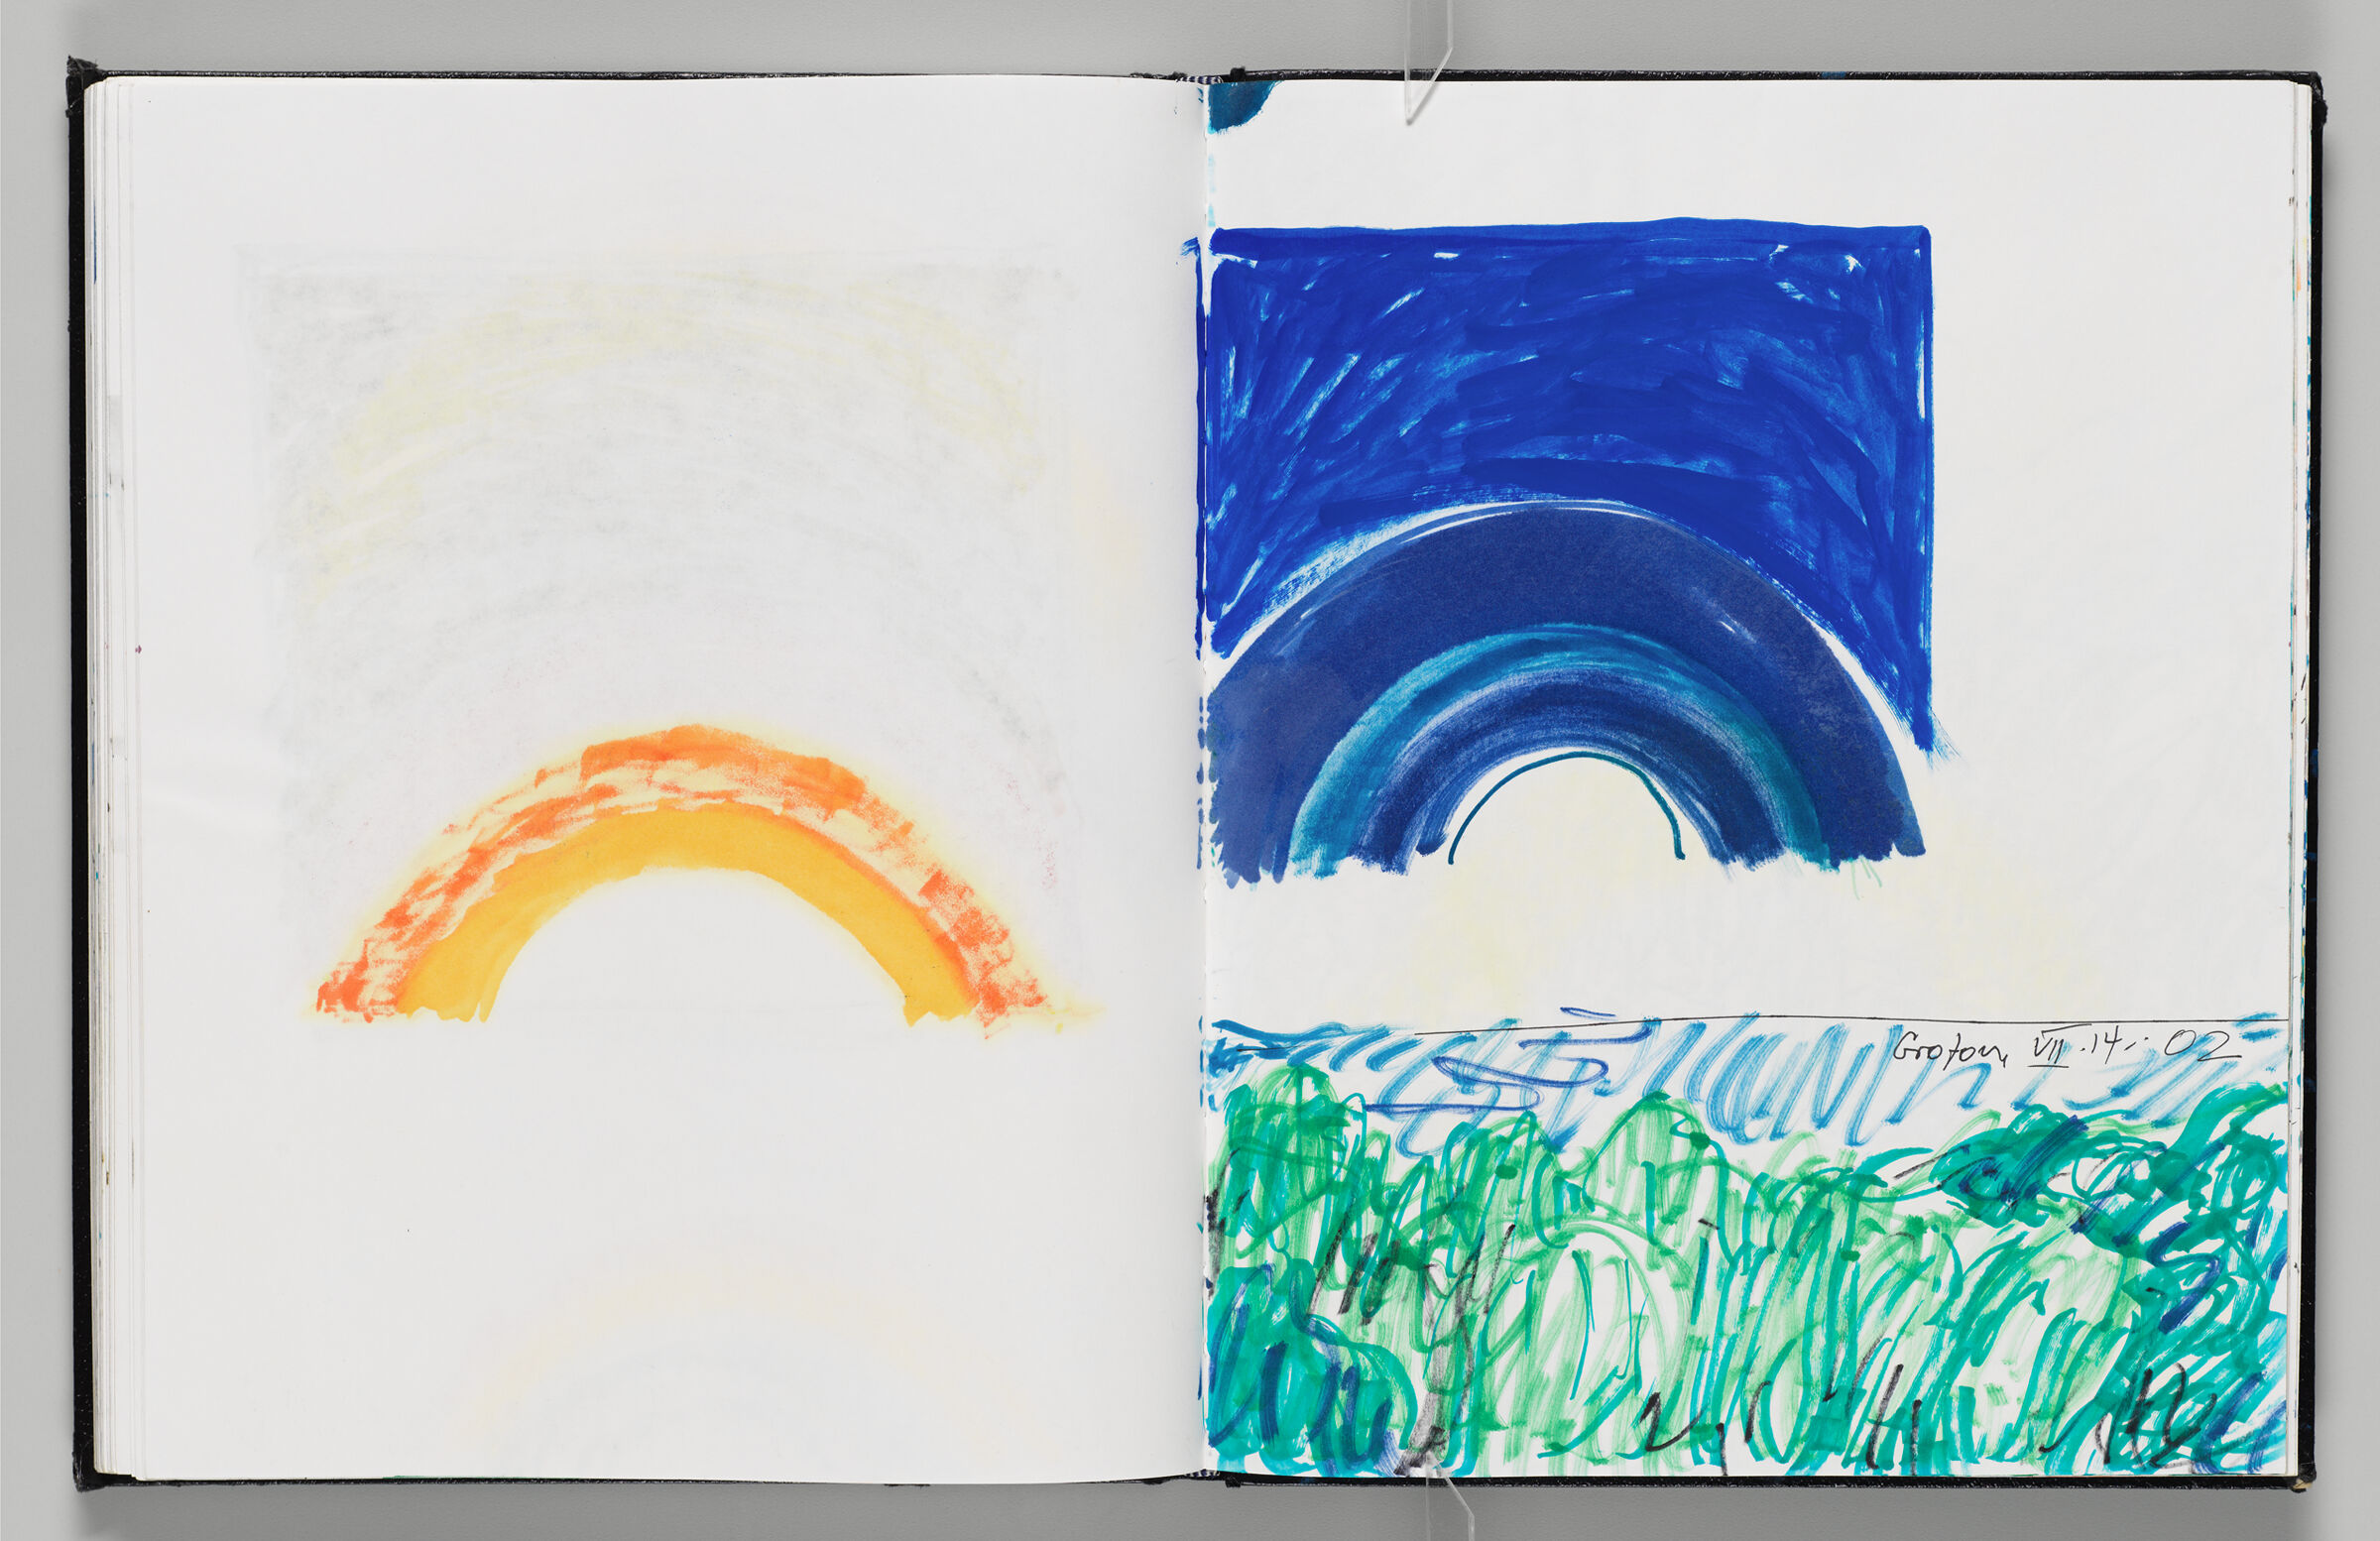 Untitled (Bleed-Through Of Previous Page, Left Page); Untitled (Rainbow Design For Rosenthal And Groton Landscape, Right Page)